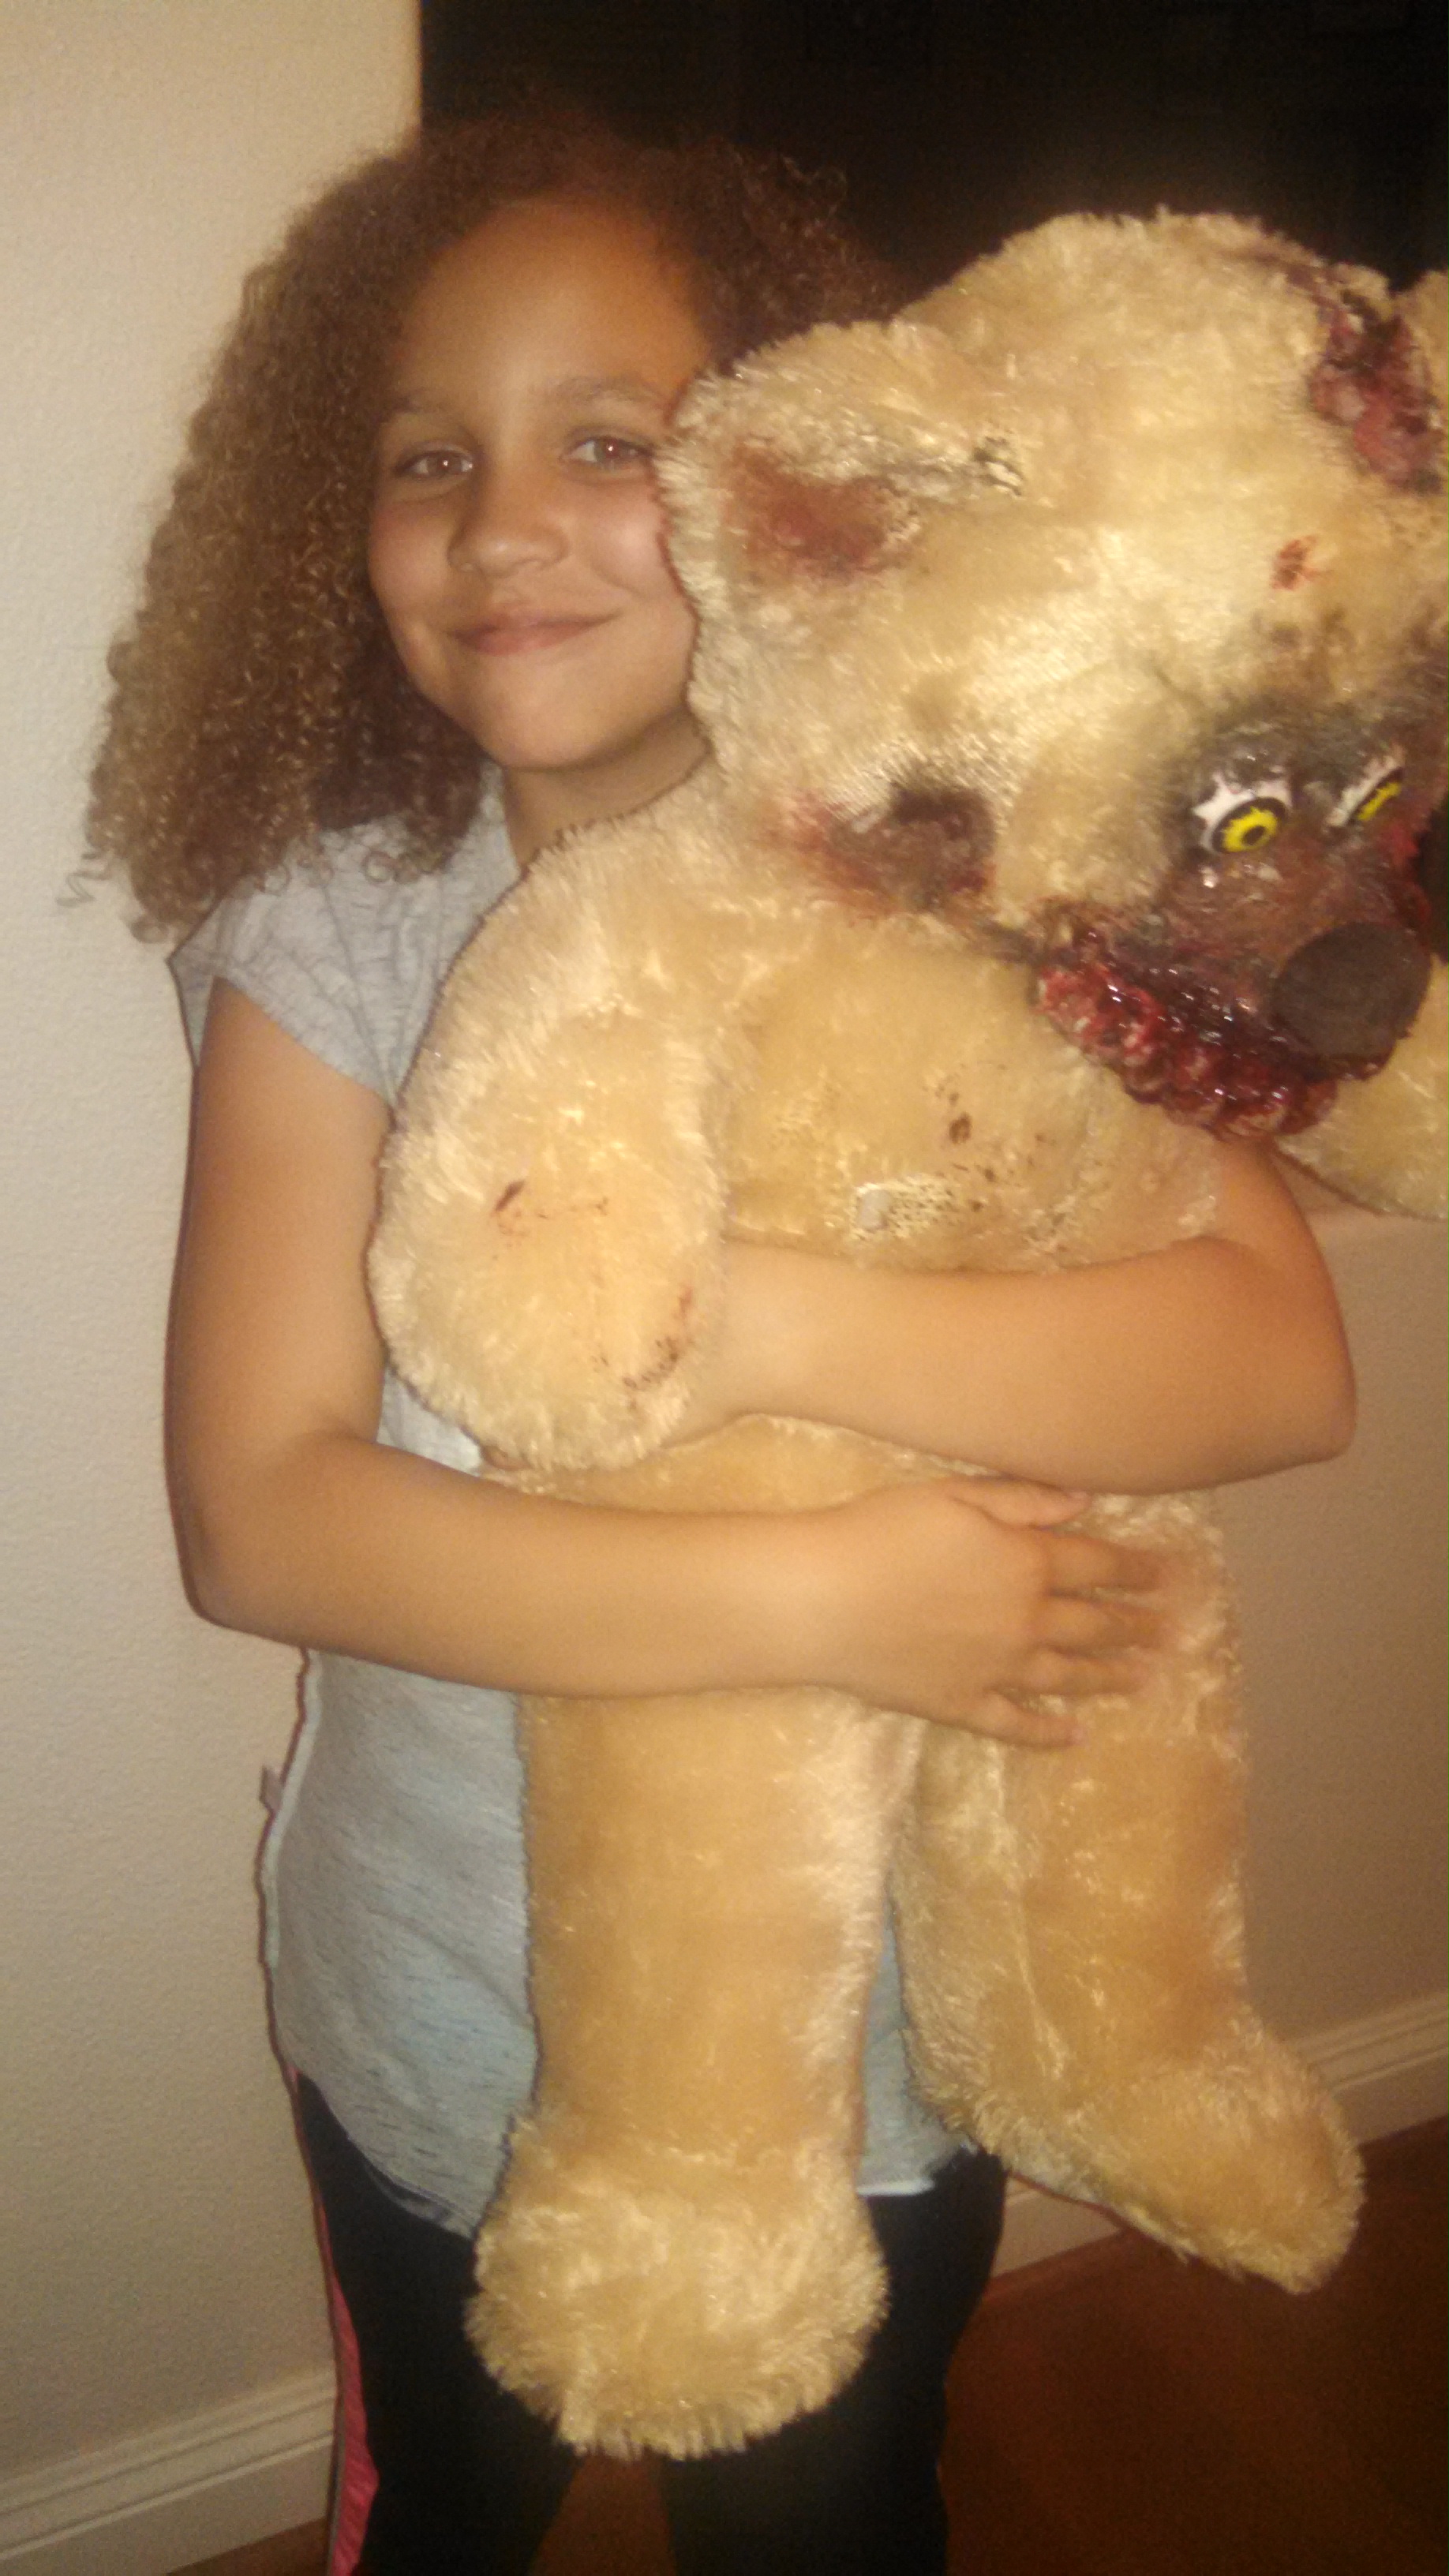 Tiana and the monster teddy bear.